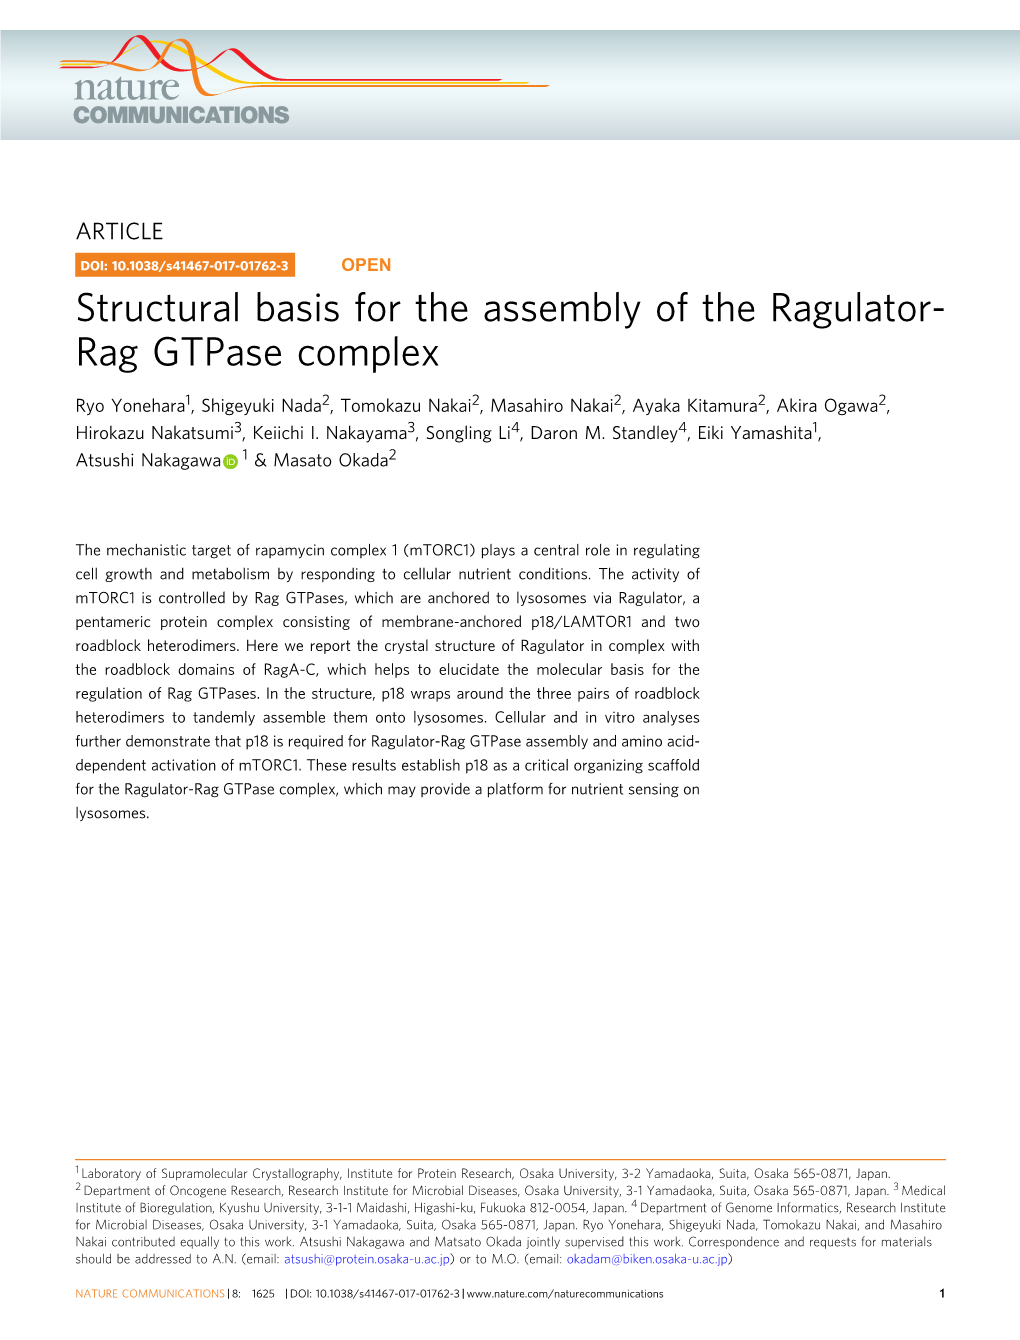 Structural Basis for the Assembly of the Ragulator-Rag Gtpase Complex